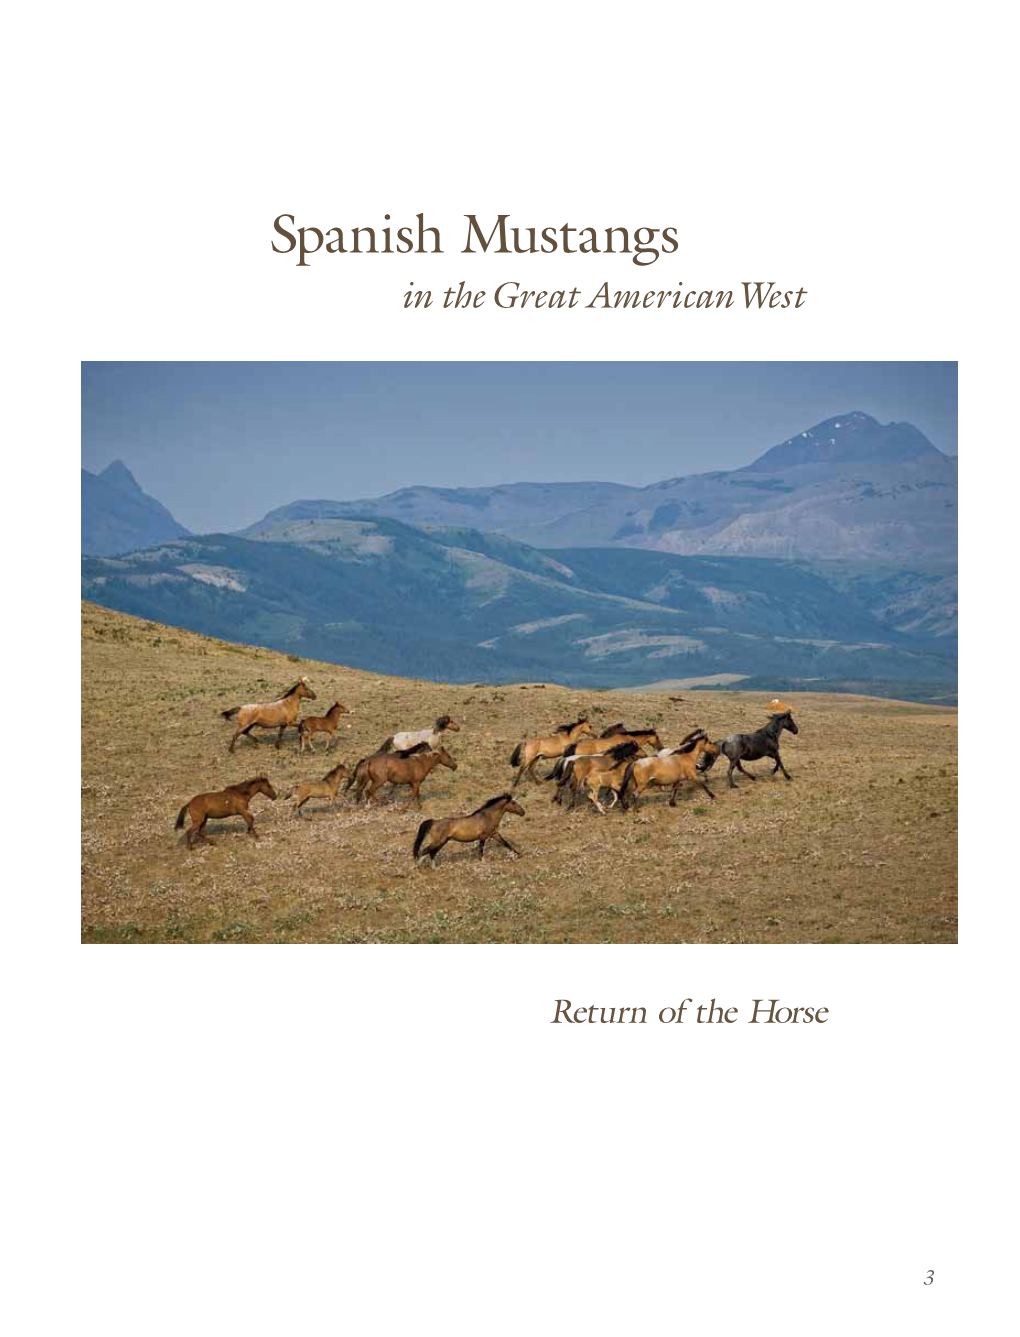 Spanish Mustangs in the Great American West